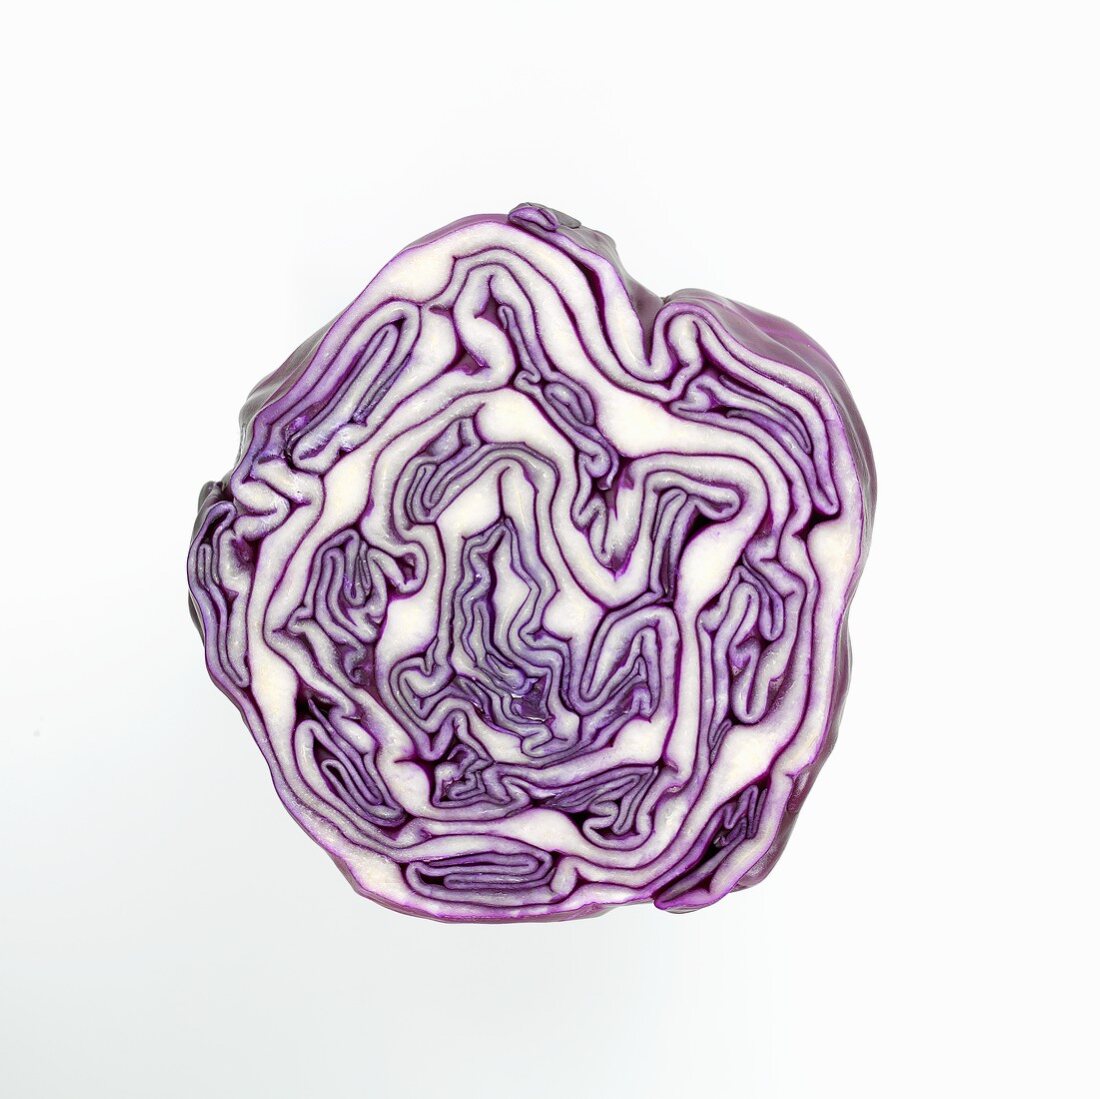 Half of a red cabbage